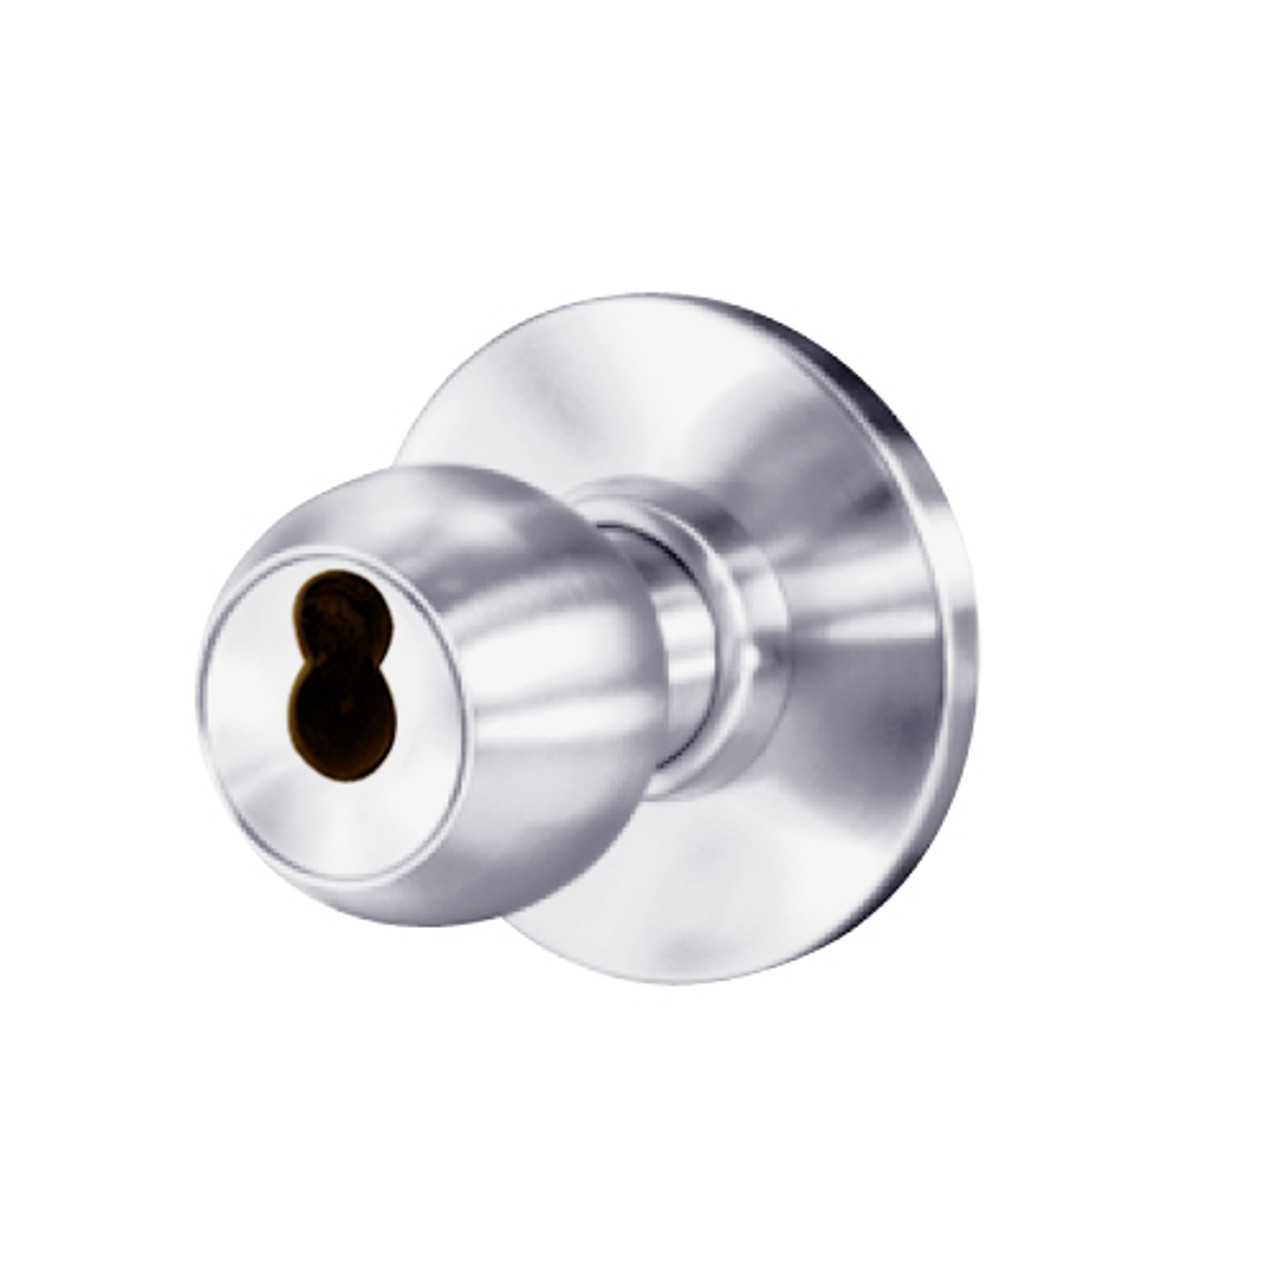 8K47YR4AS3626 Best 8K Series Exit Heavy Duty Cylindrical Knob Locks with Round Style in Satin Chrome